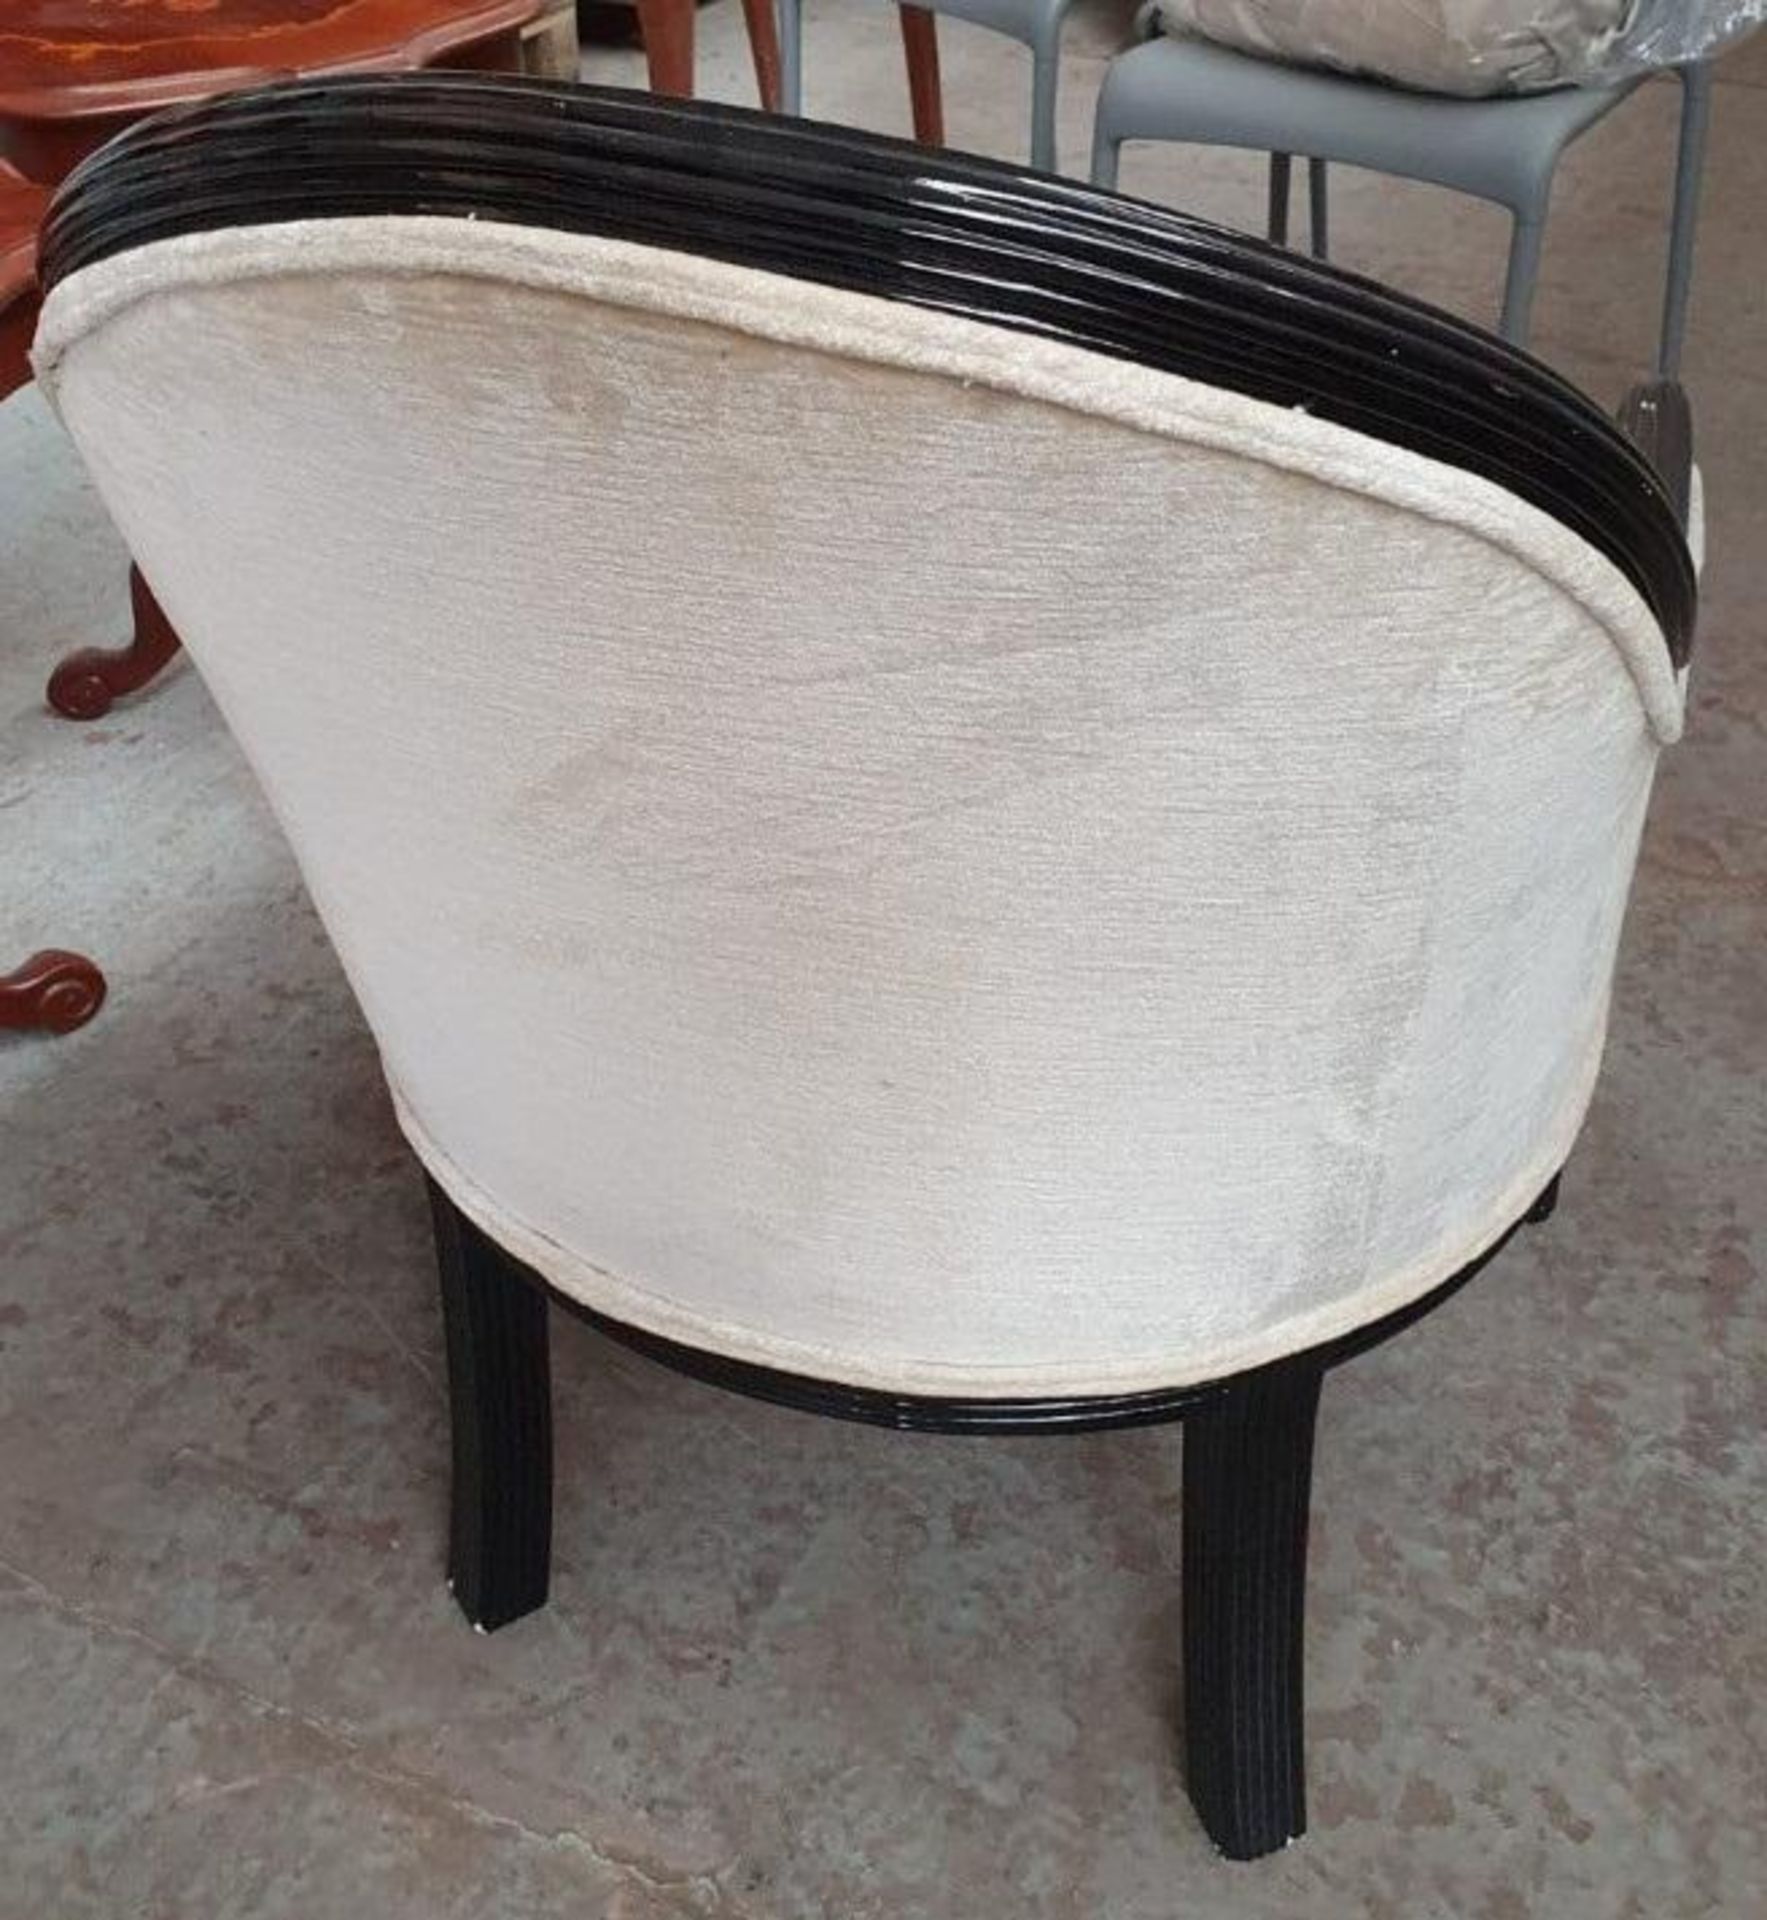 1 x Attractive Curved Armchair In Cream - Pre-owned In Good Condition - £1 Start, No Reserve - Image 5 of 10